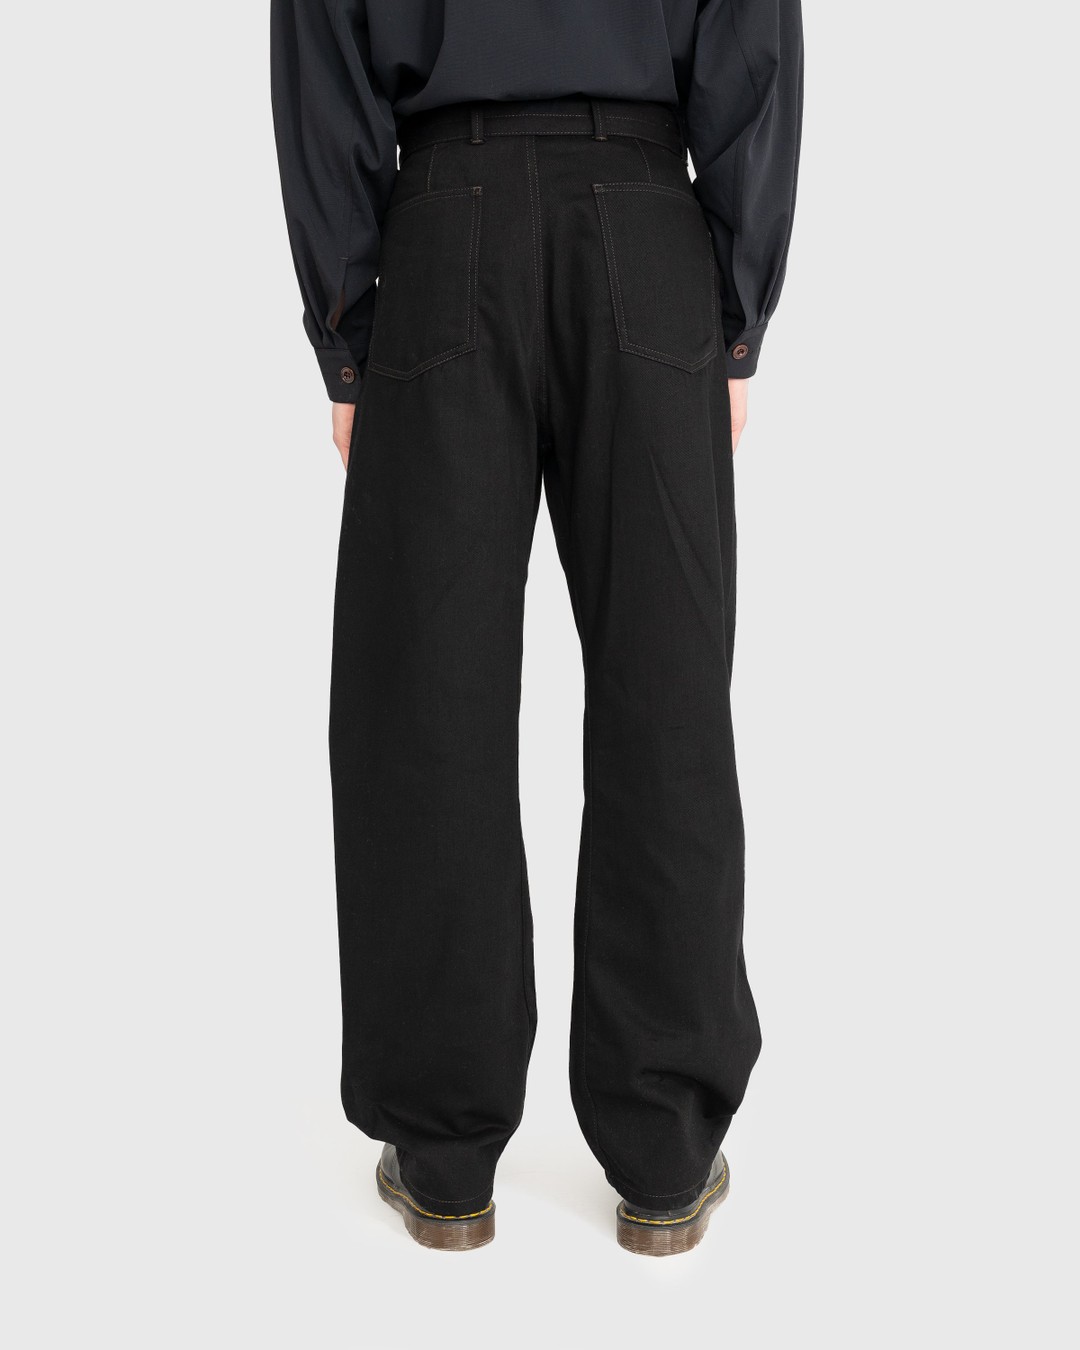 Lemaire – Twisted Belted Pants Black